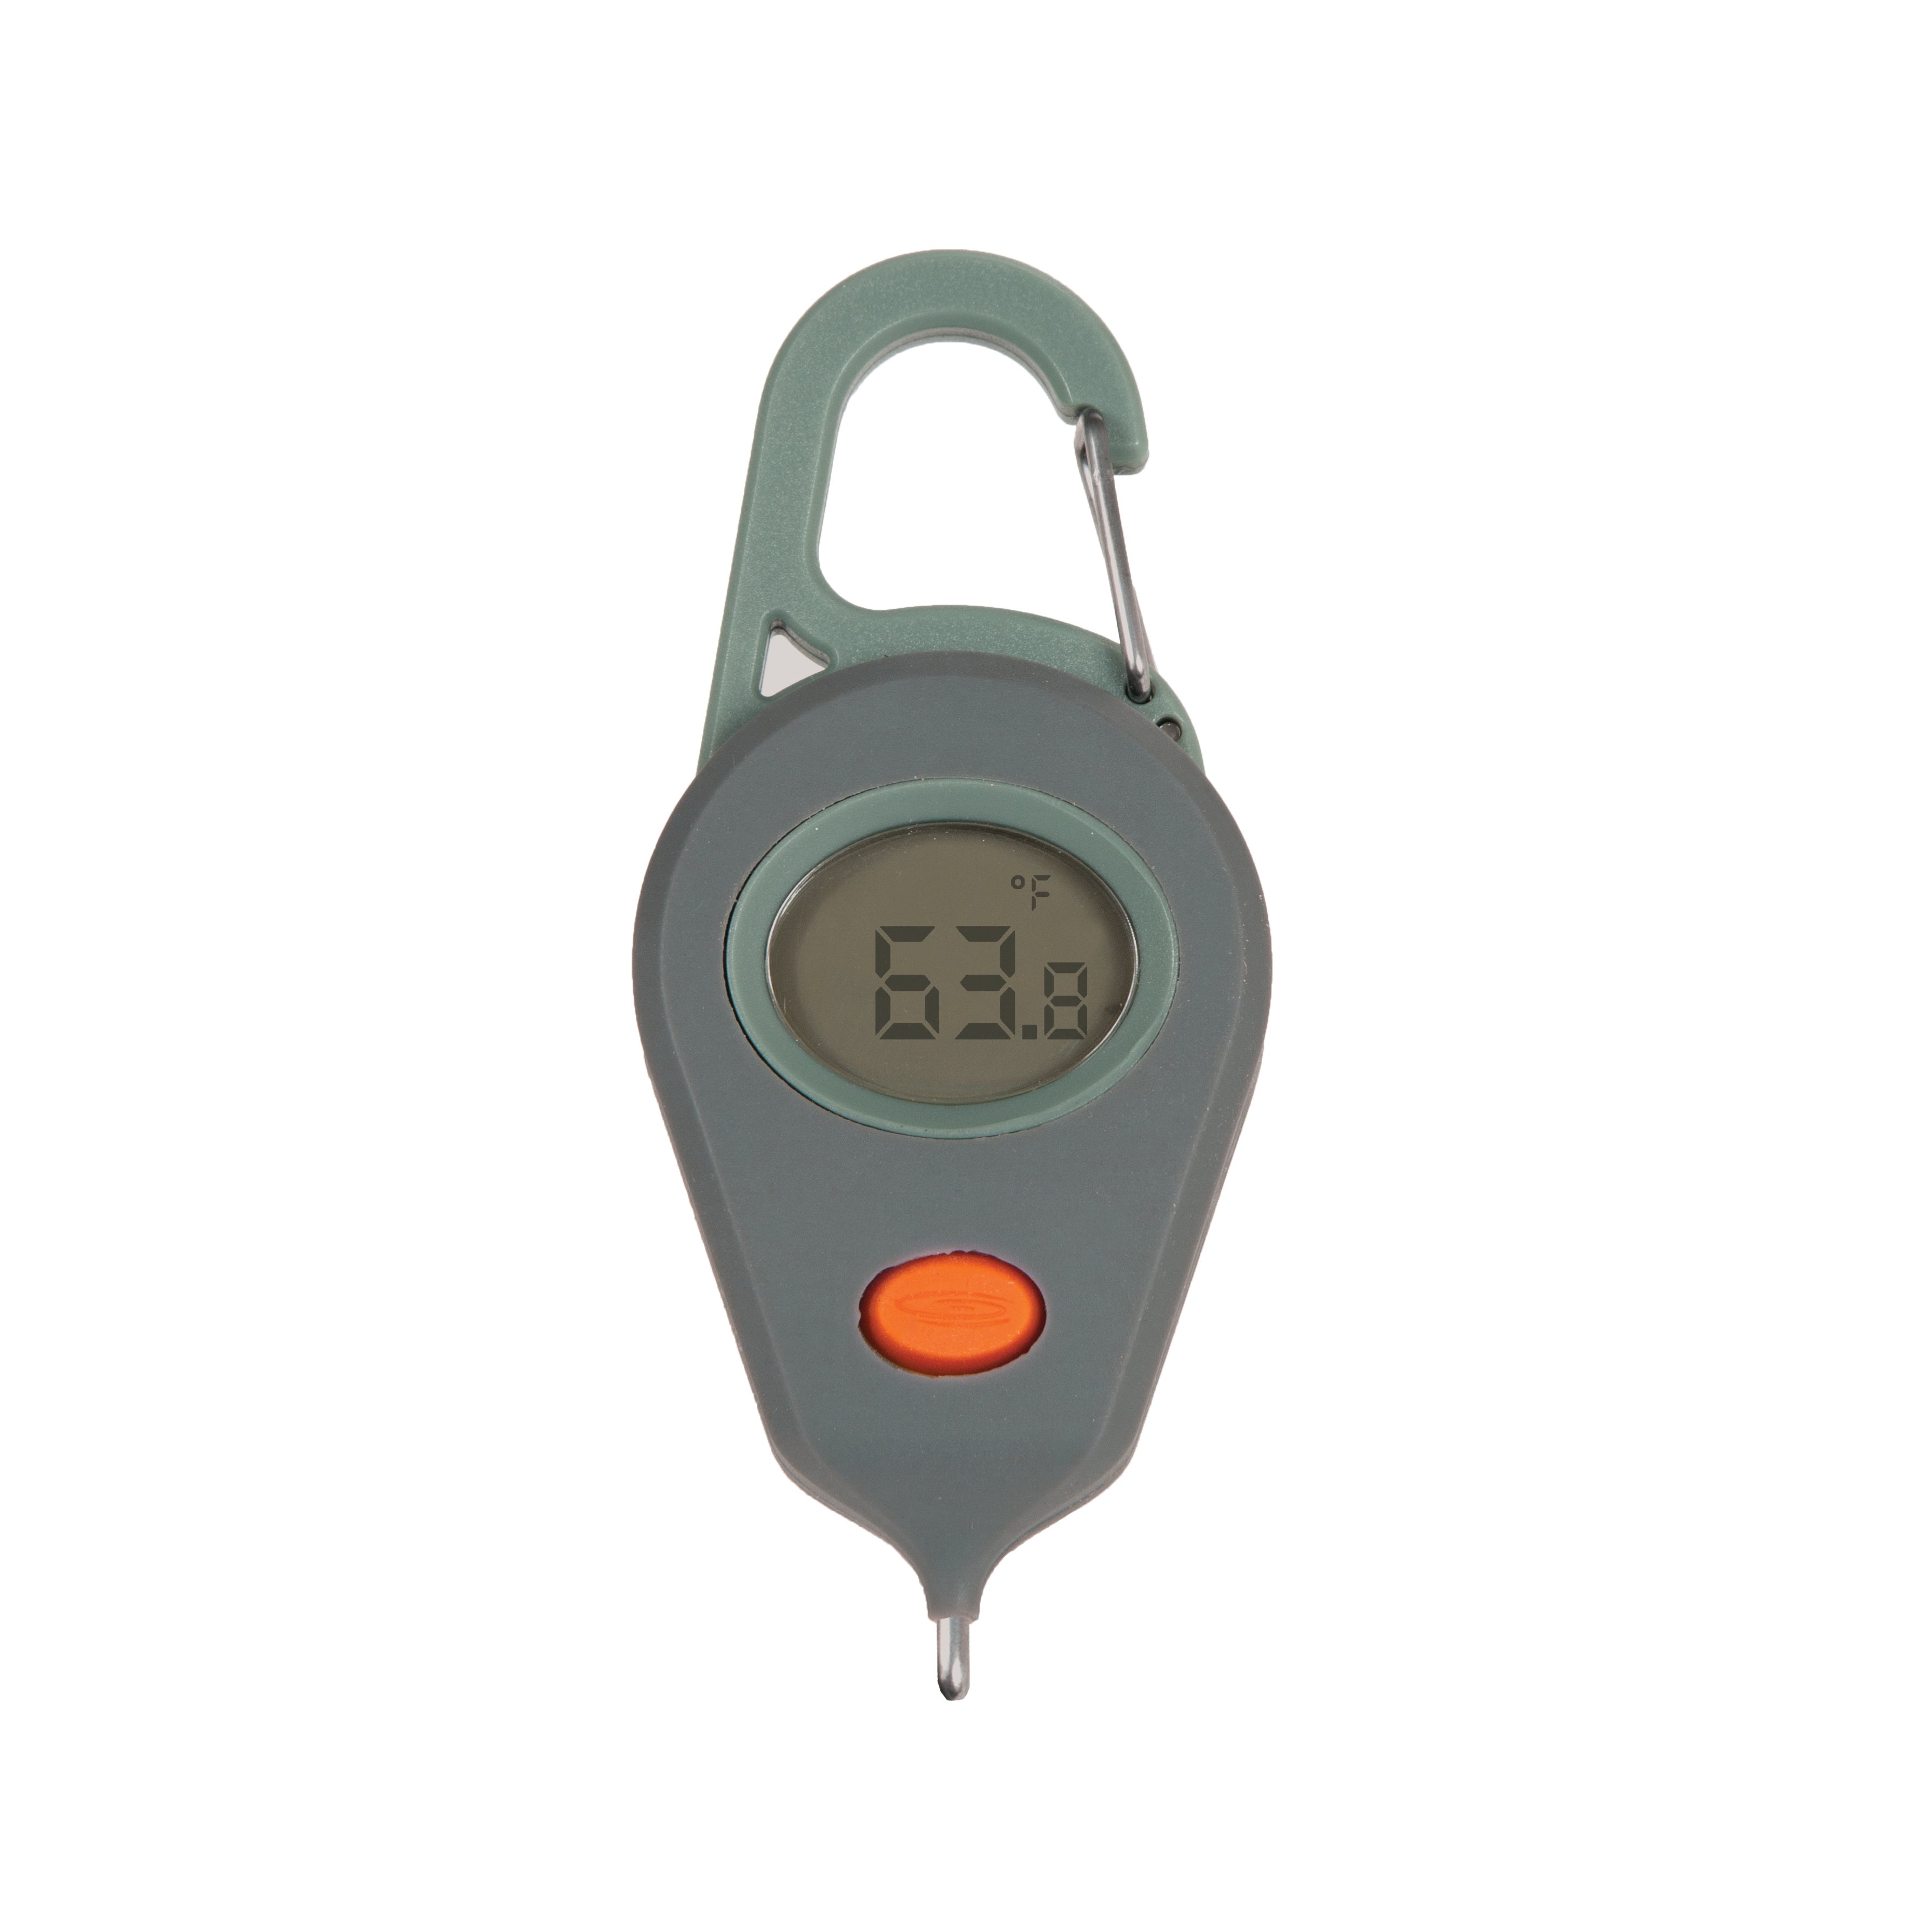 Why Do I Need a Thermometer for Fly Fishing? 